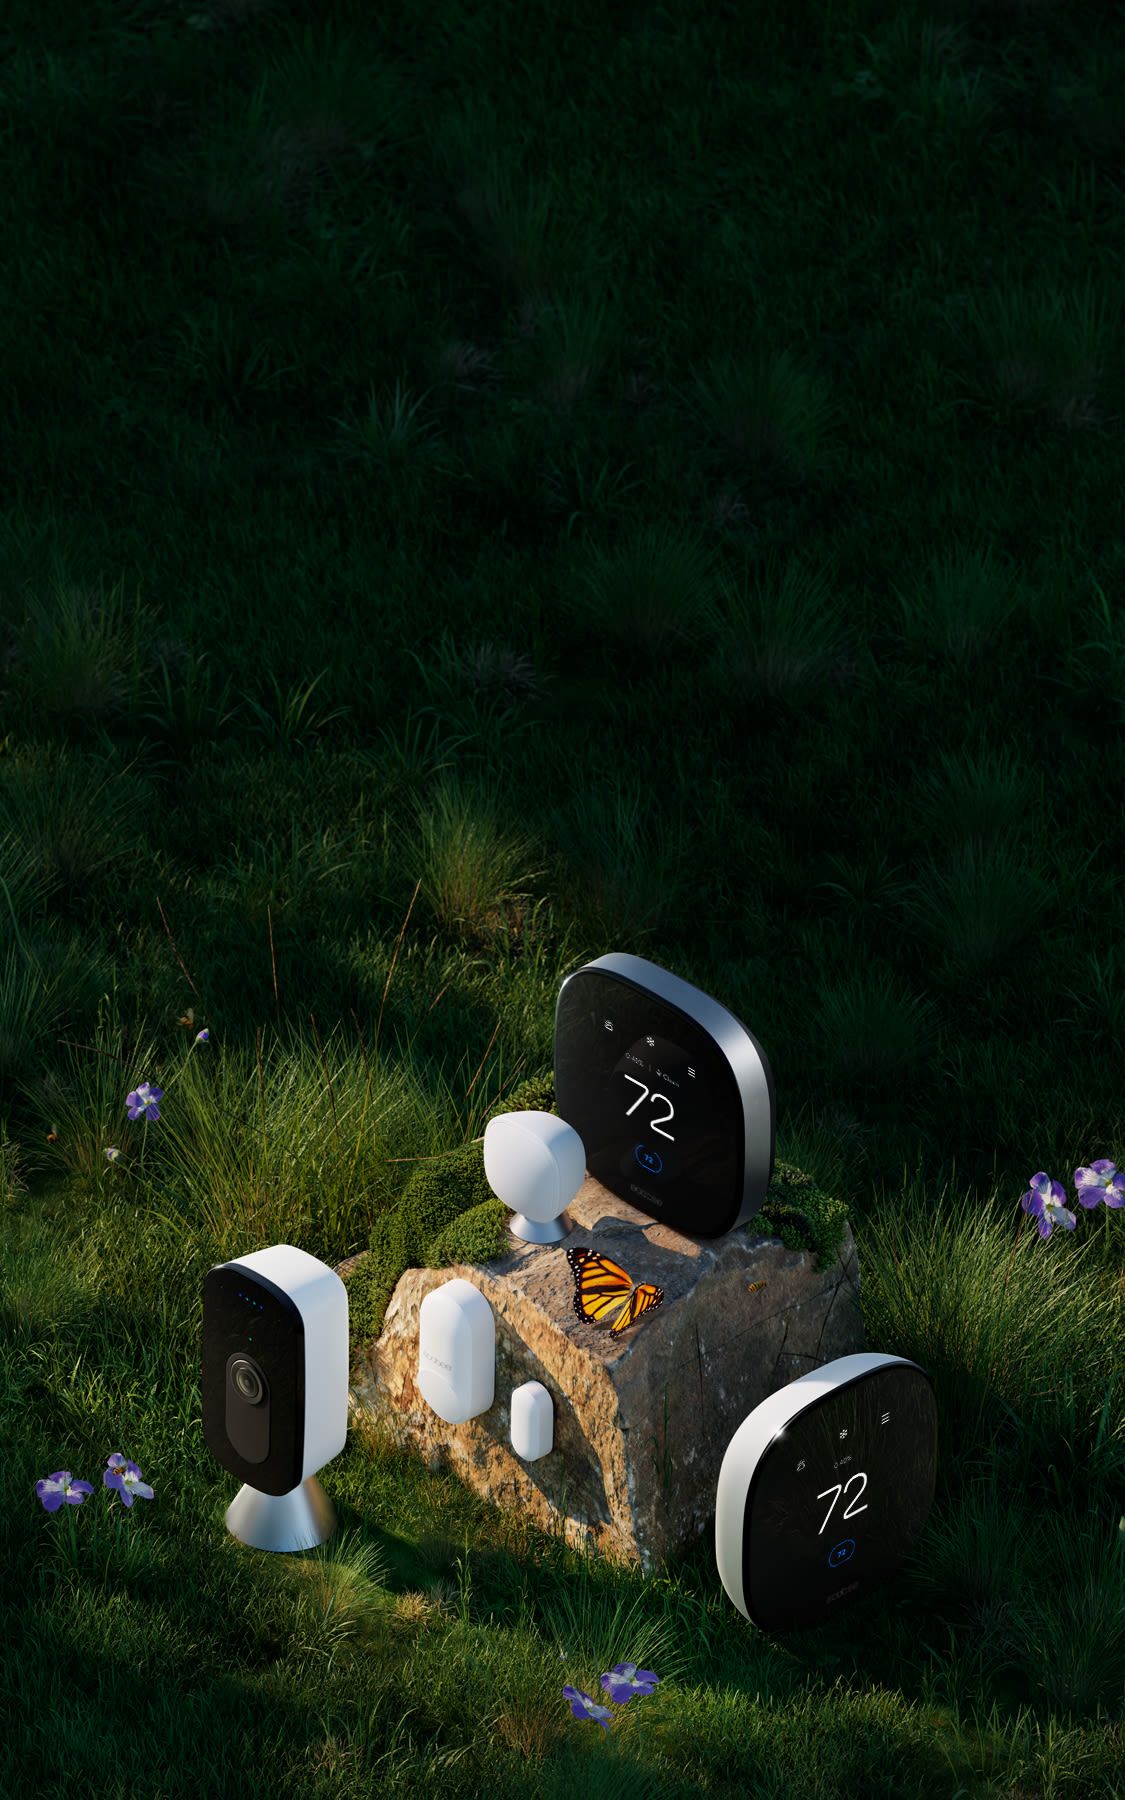 ecobee Smart Thermostat Premium, Smart Thermostat Enhanced, Smart Camera, and sensors sit on a rock in grass with a butterfly and flowers.